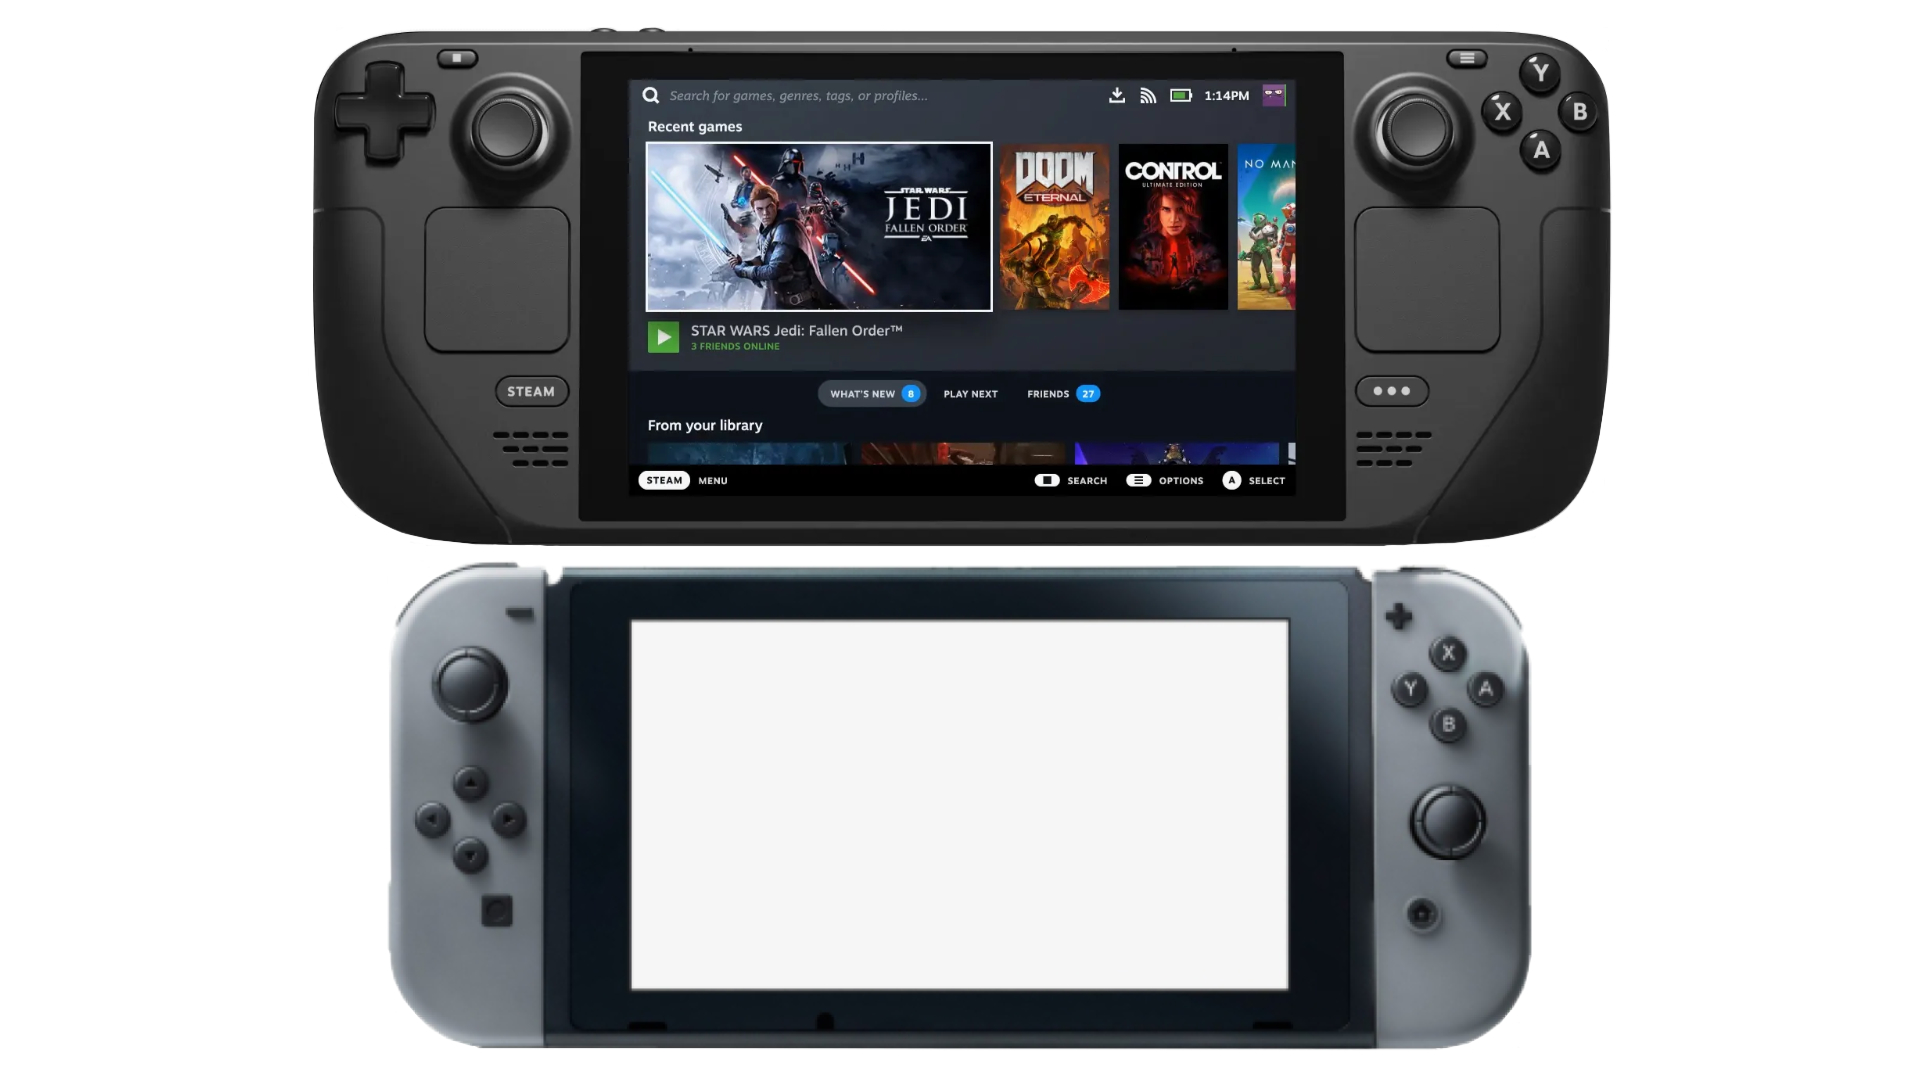 dansk frugthave Etablere The Nintendo Switch makes the Steam Deck look like a colossus | PCGamesN